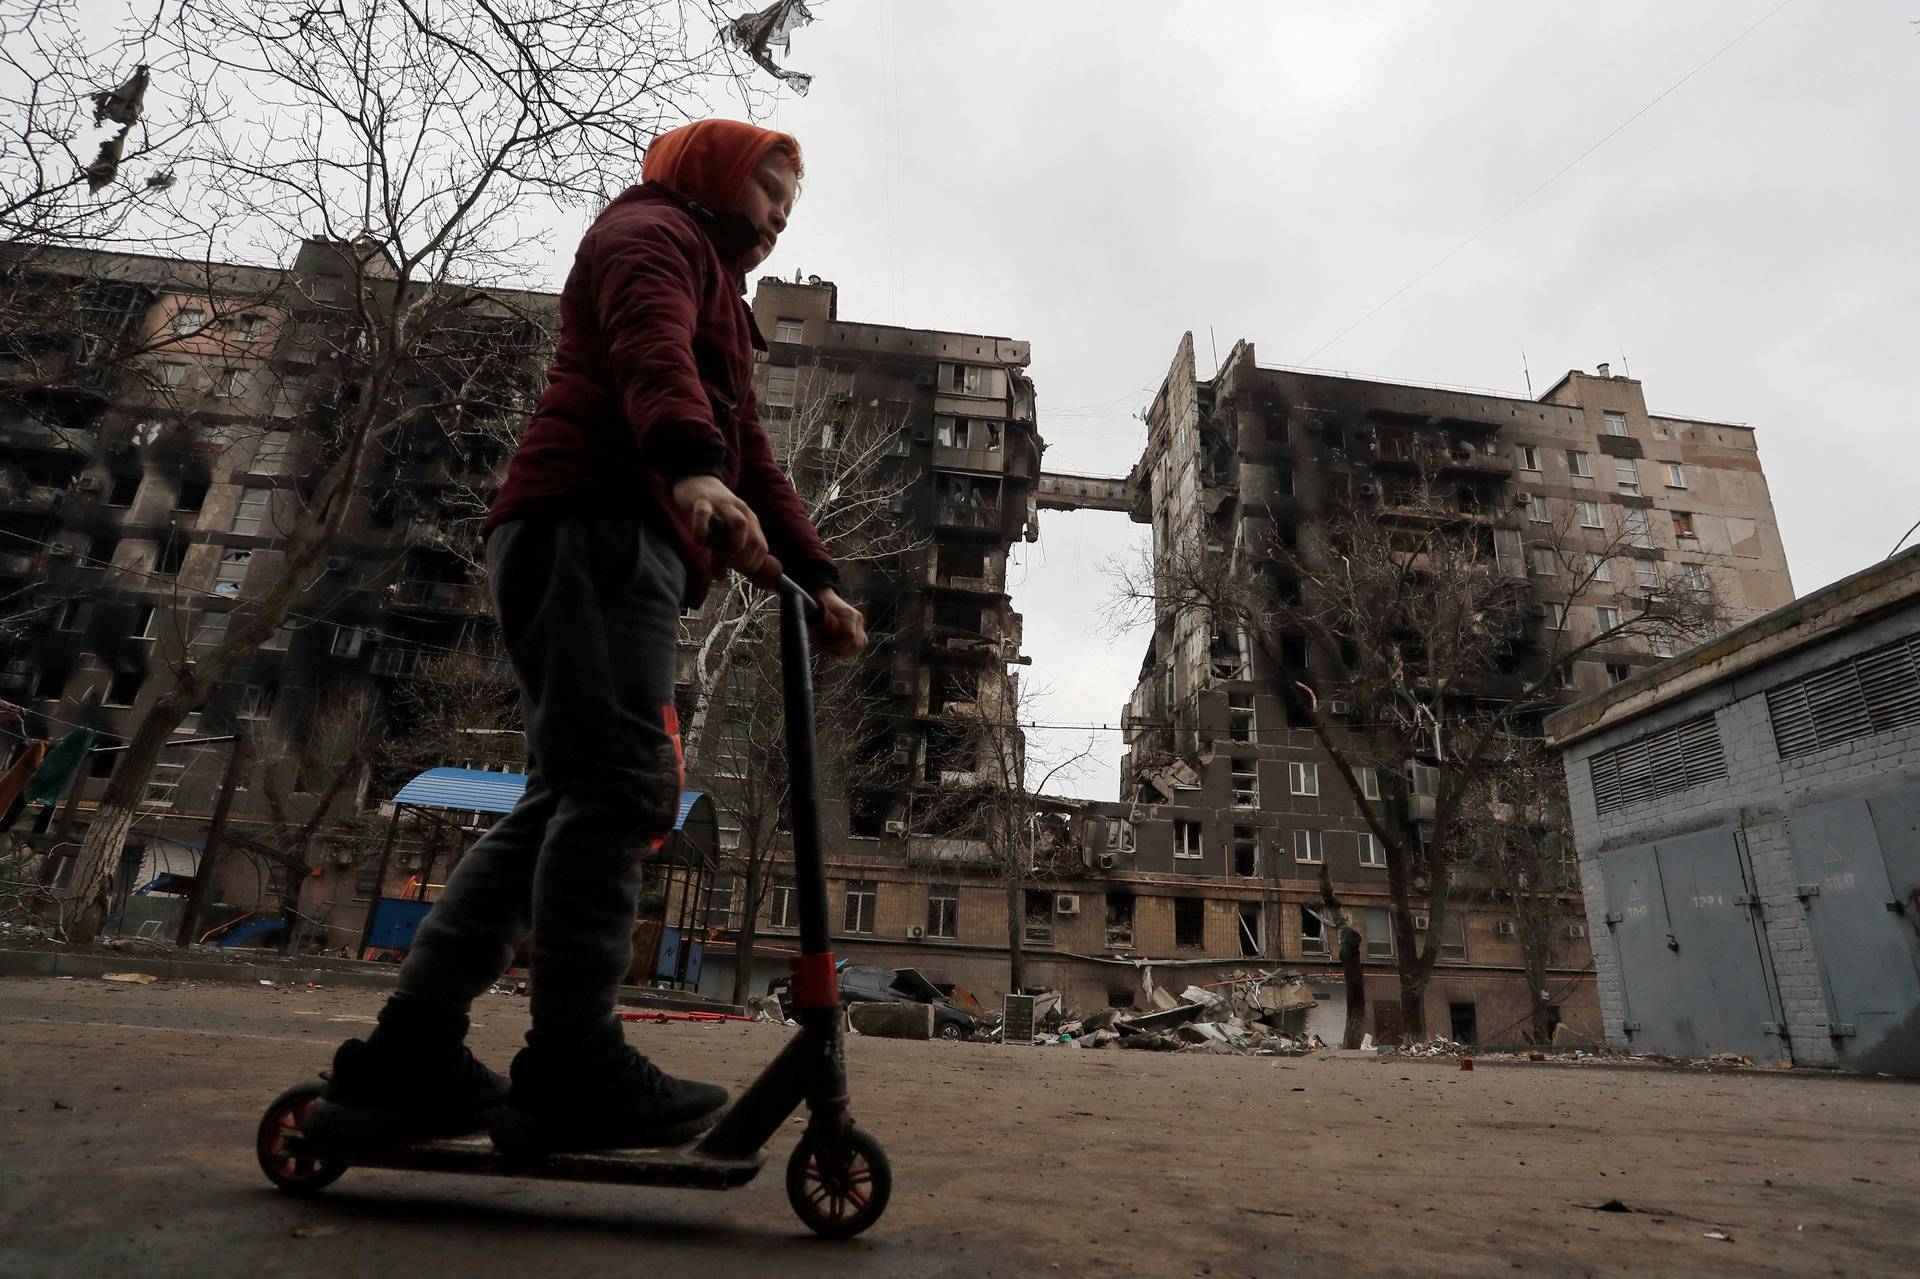 FILE PHOTO: A boy rides a scooter near a destroyed building in Mariupol